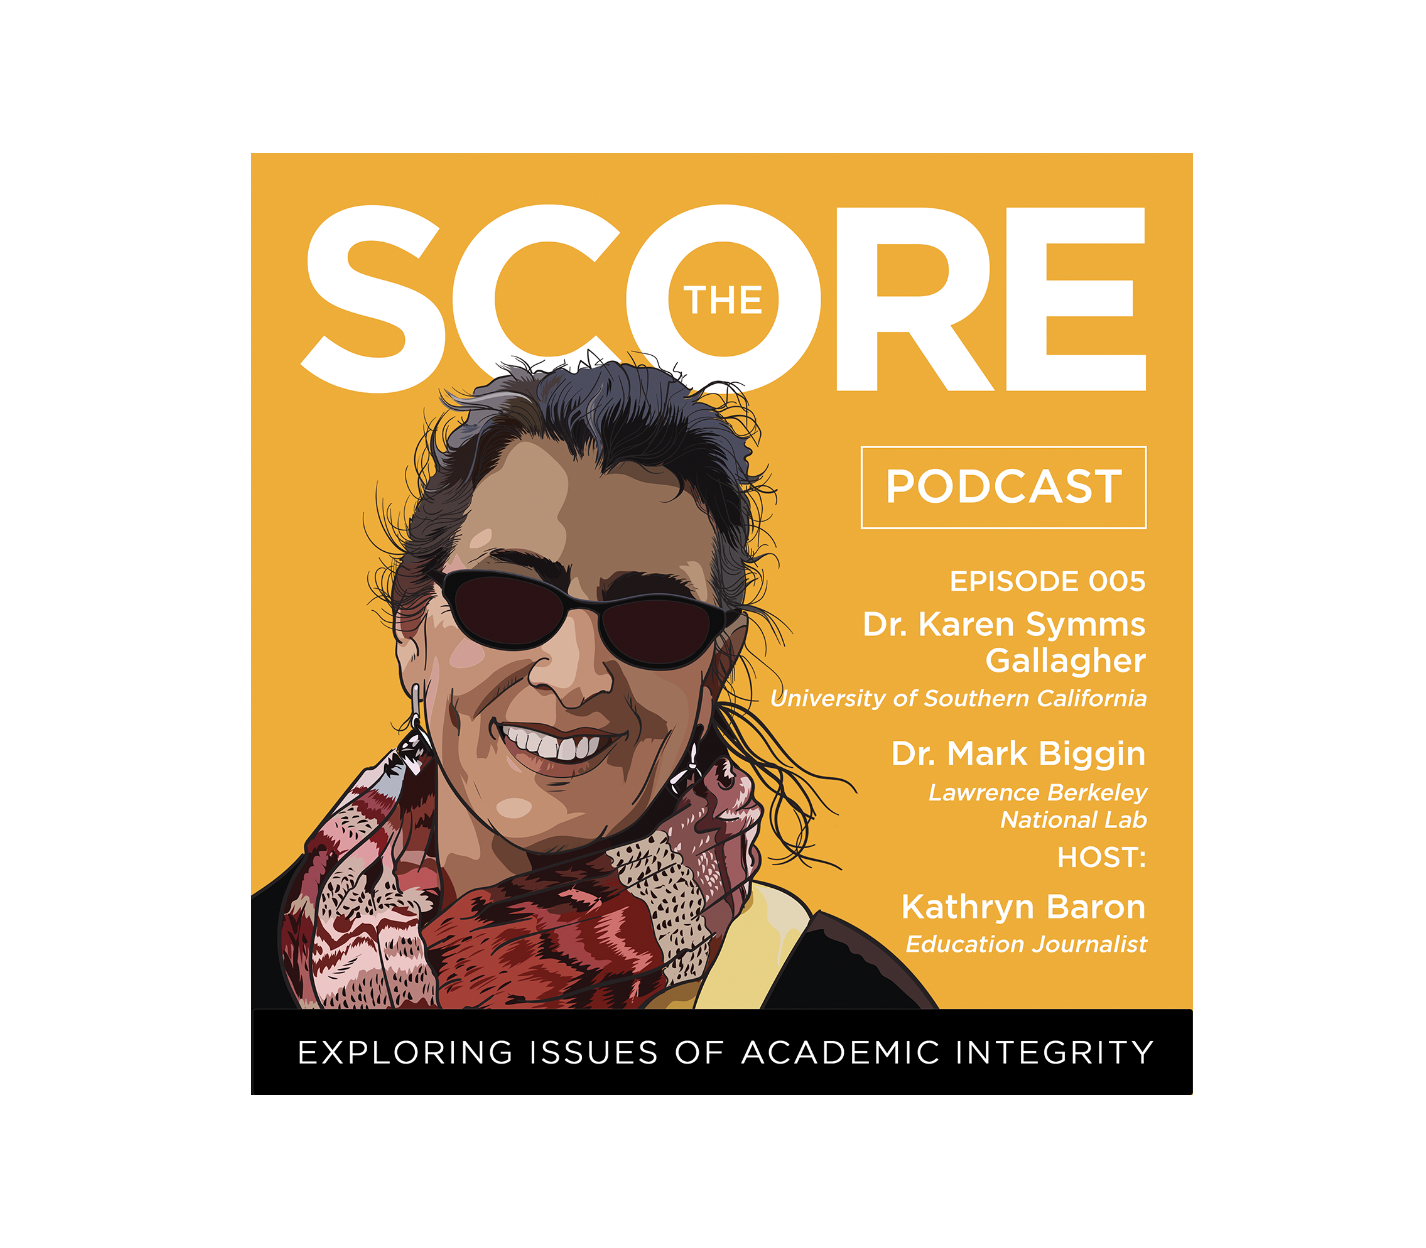 The Score Podcast Episode 005, Guests Mark Biggin and Karen Symms Gallagher Talk about Detecting Collusion and Awareness